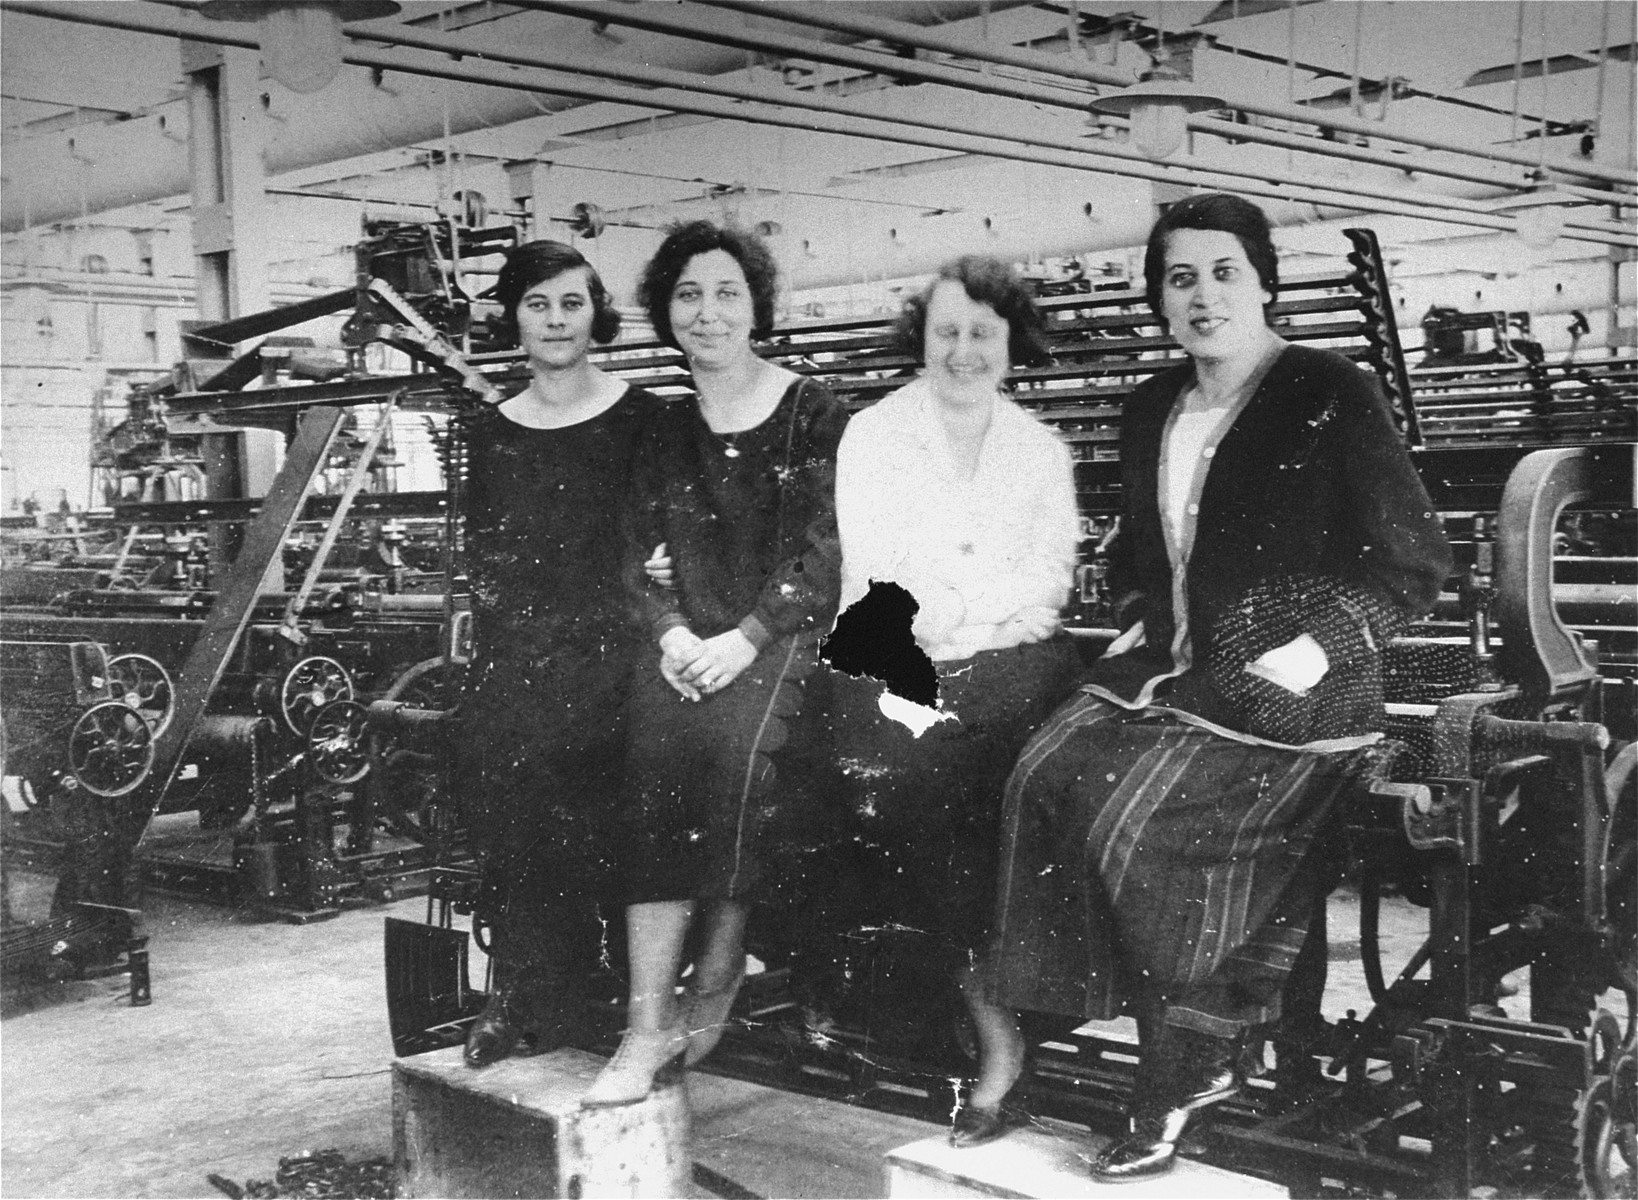 Four young Jewish female workers pose in the Goldberger textile factory in Budapest.  

Among those pictured is Margit Kornhauser (wearing the white blouse).